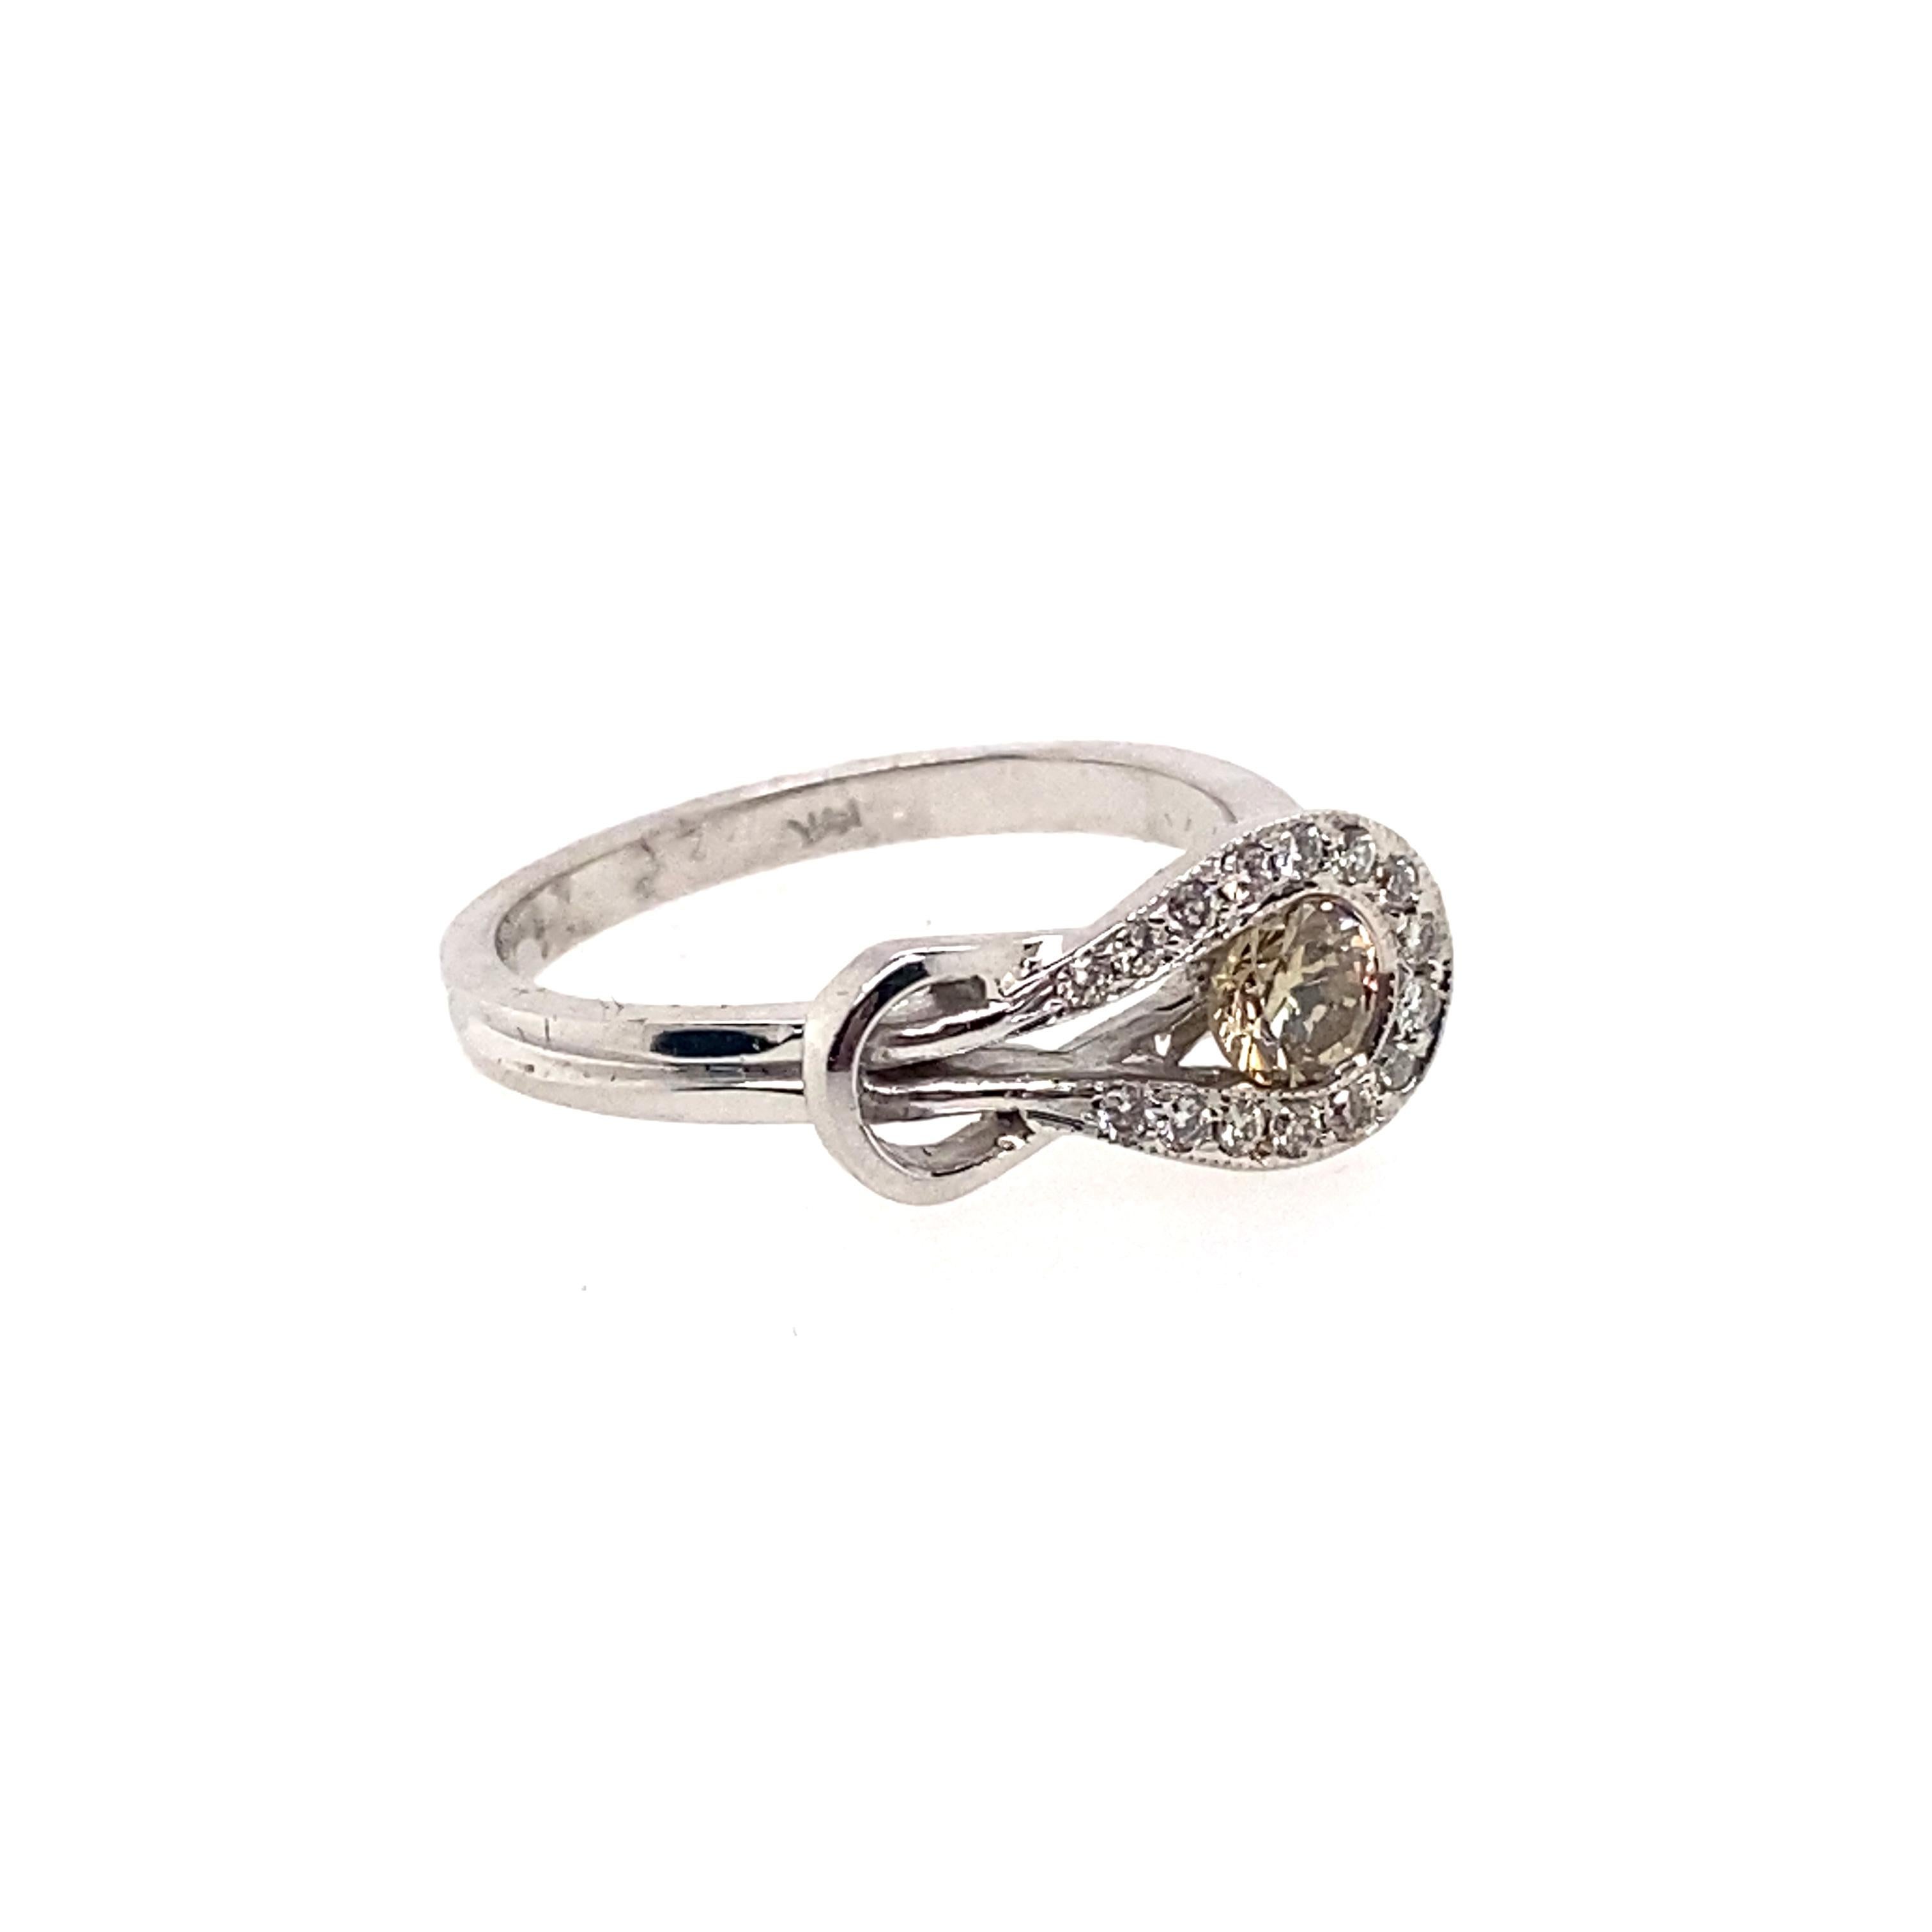 This unusual diamond ring design features 0.28 carat round brilliant cut brown diamond within a tilted loop bezel setting. The side diamonds are set in the loop. This simple yet contemporary design which will provide you with both comfort and